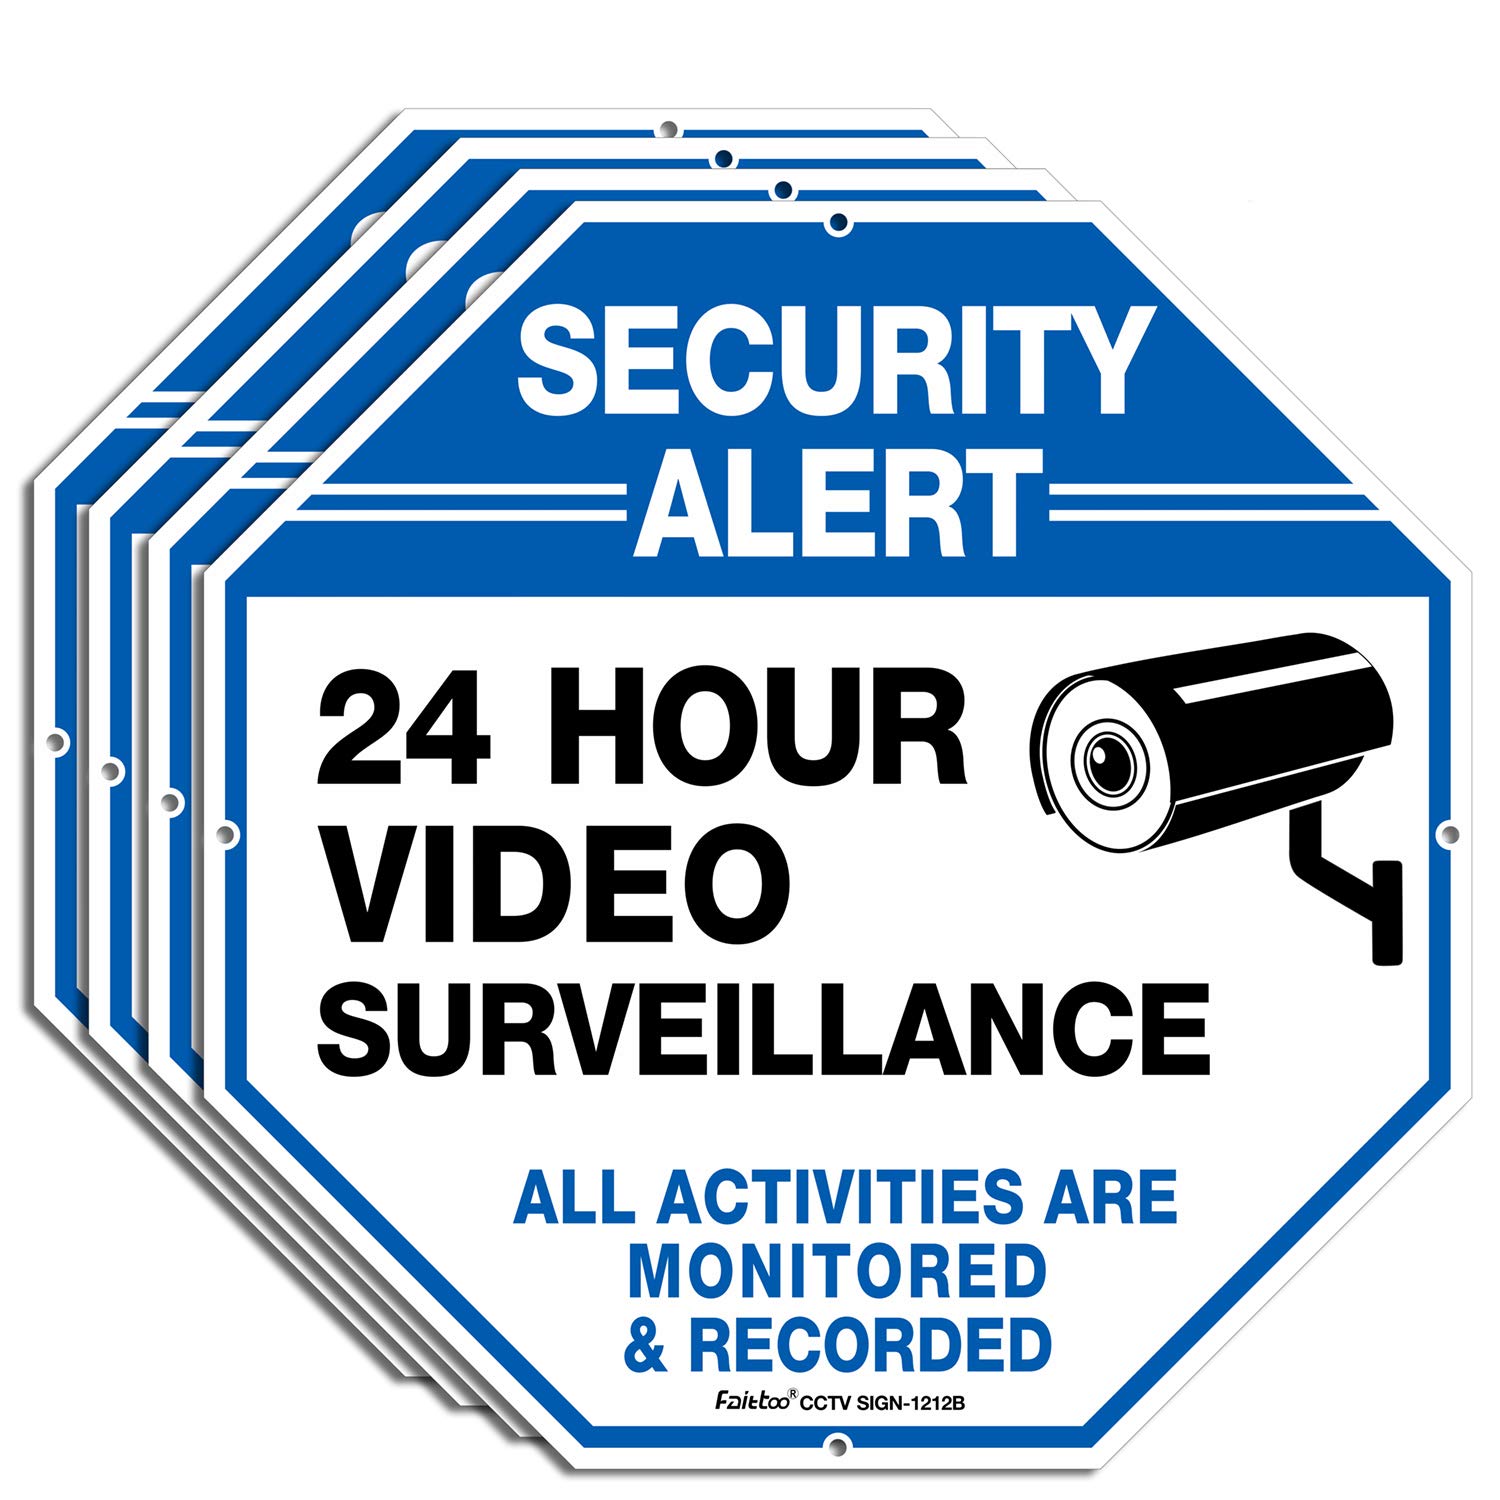 Video Surveillance Sign,Security Camera Sign, 12x12 Security Alert 24 Hour Video Surveillance Metal Sign,All Activities Are Monitored &amp; Recorded Aluminum Sign for CCTV Video Surveillance Signs Outdoor